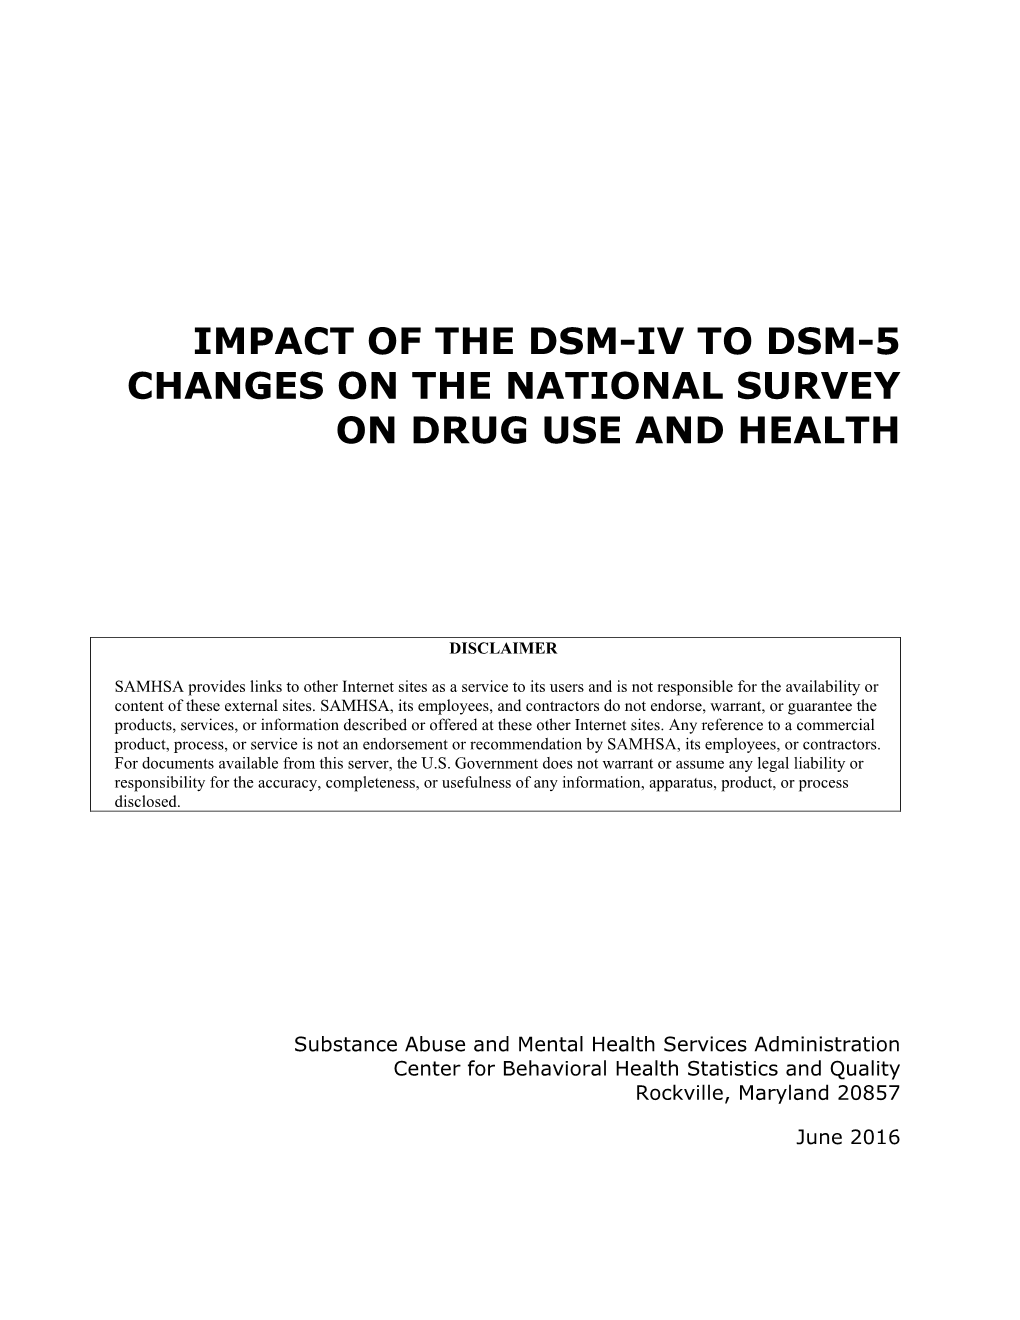 Impact of the Dsm-Iv to Dsm-5 Changes on the National Survey on Drug Use and Health